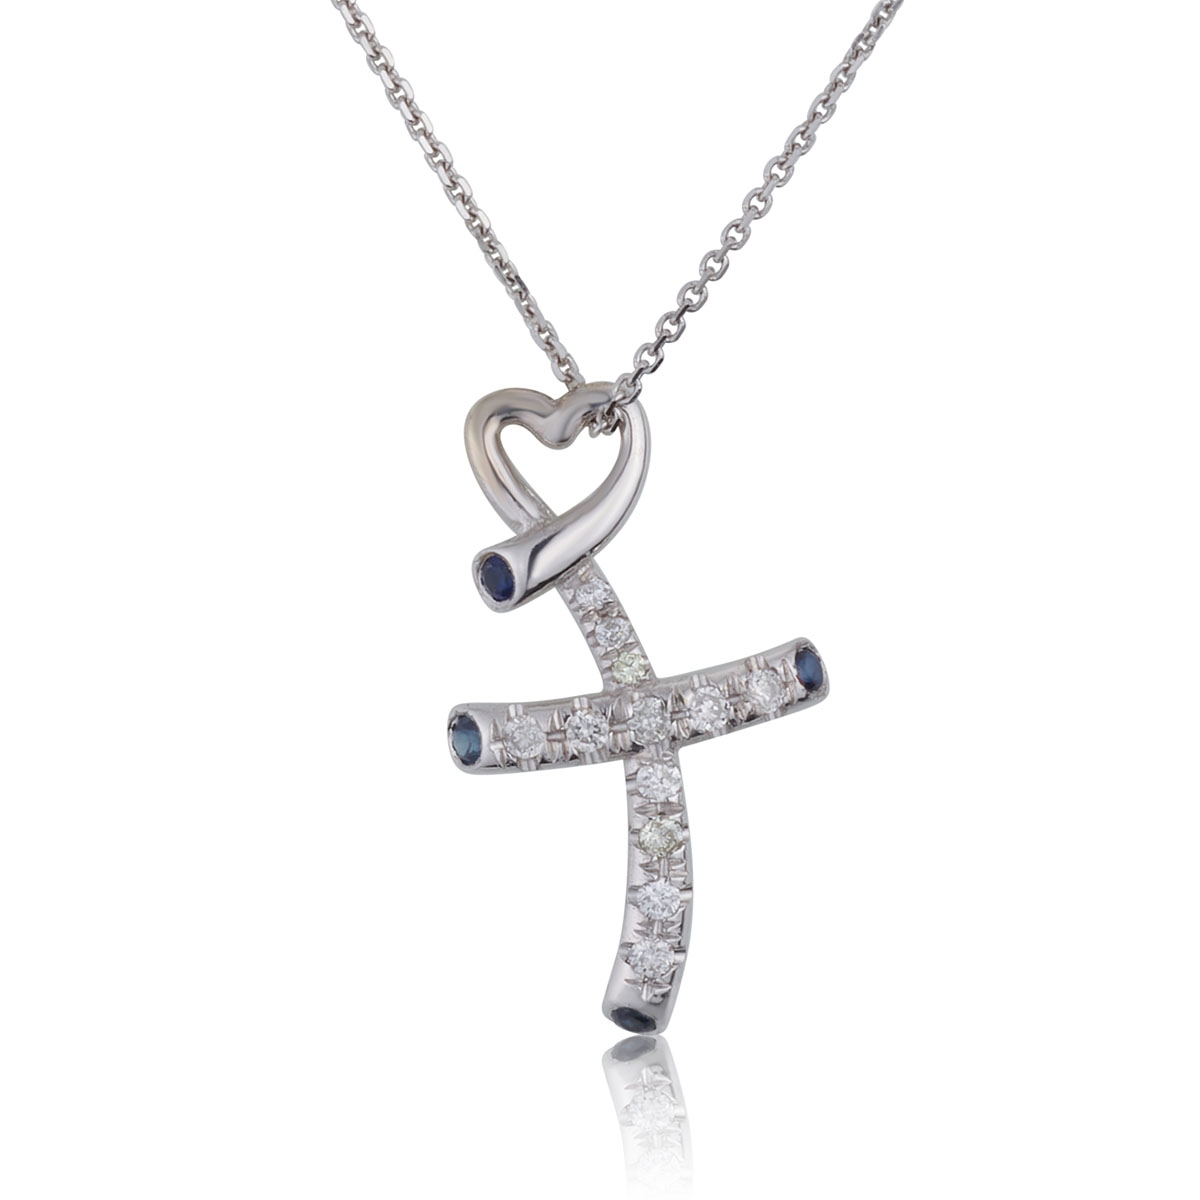 14K White Gold Cross and Heart Pendant With Diamonds and Sapphire - 1